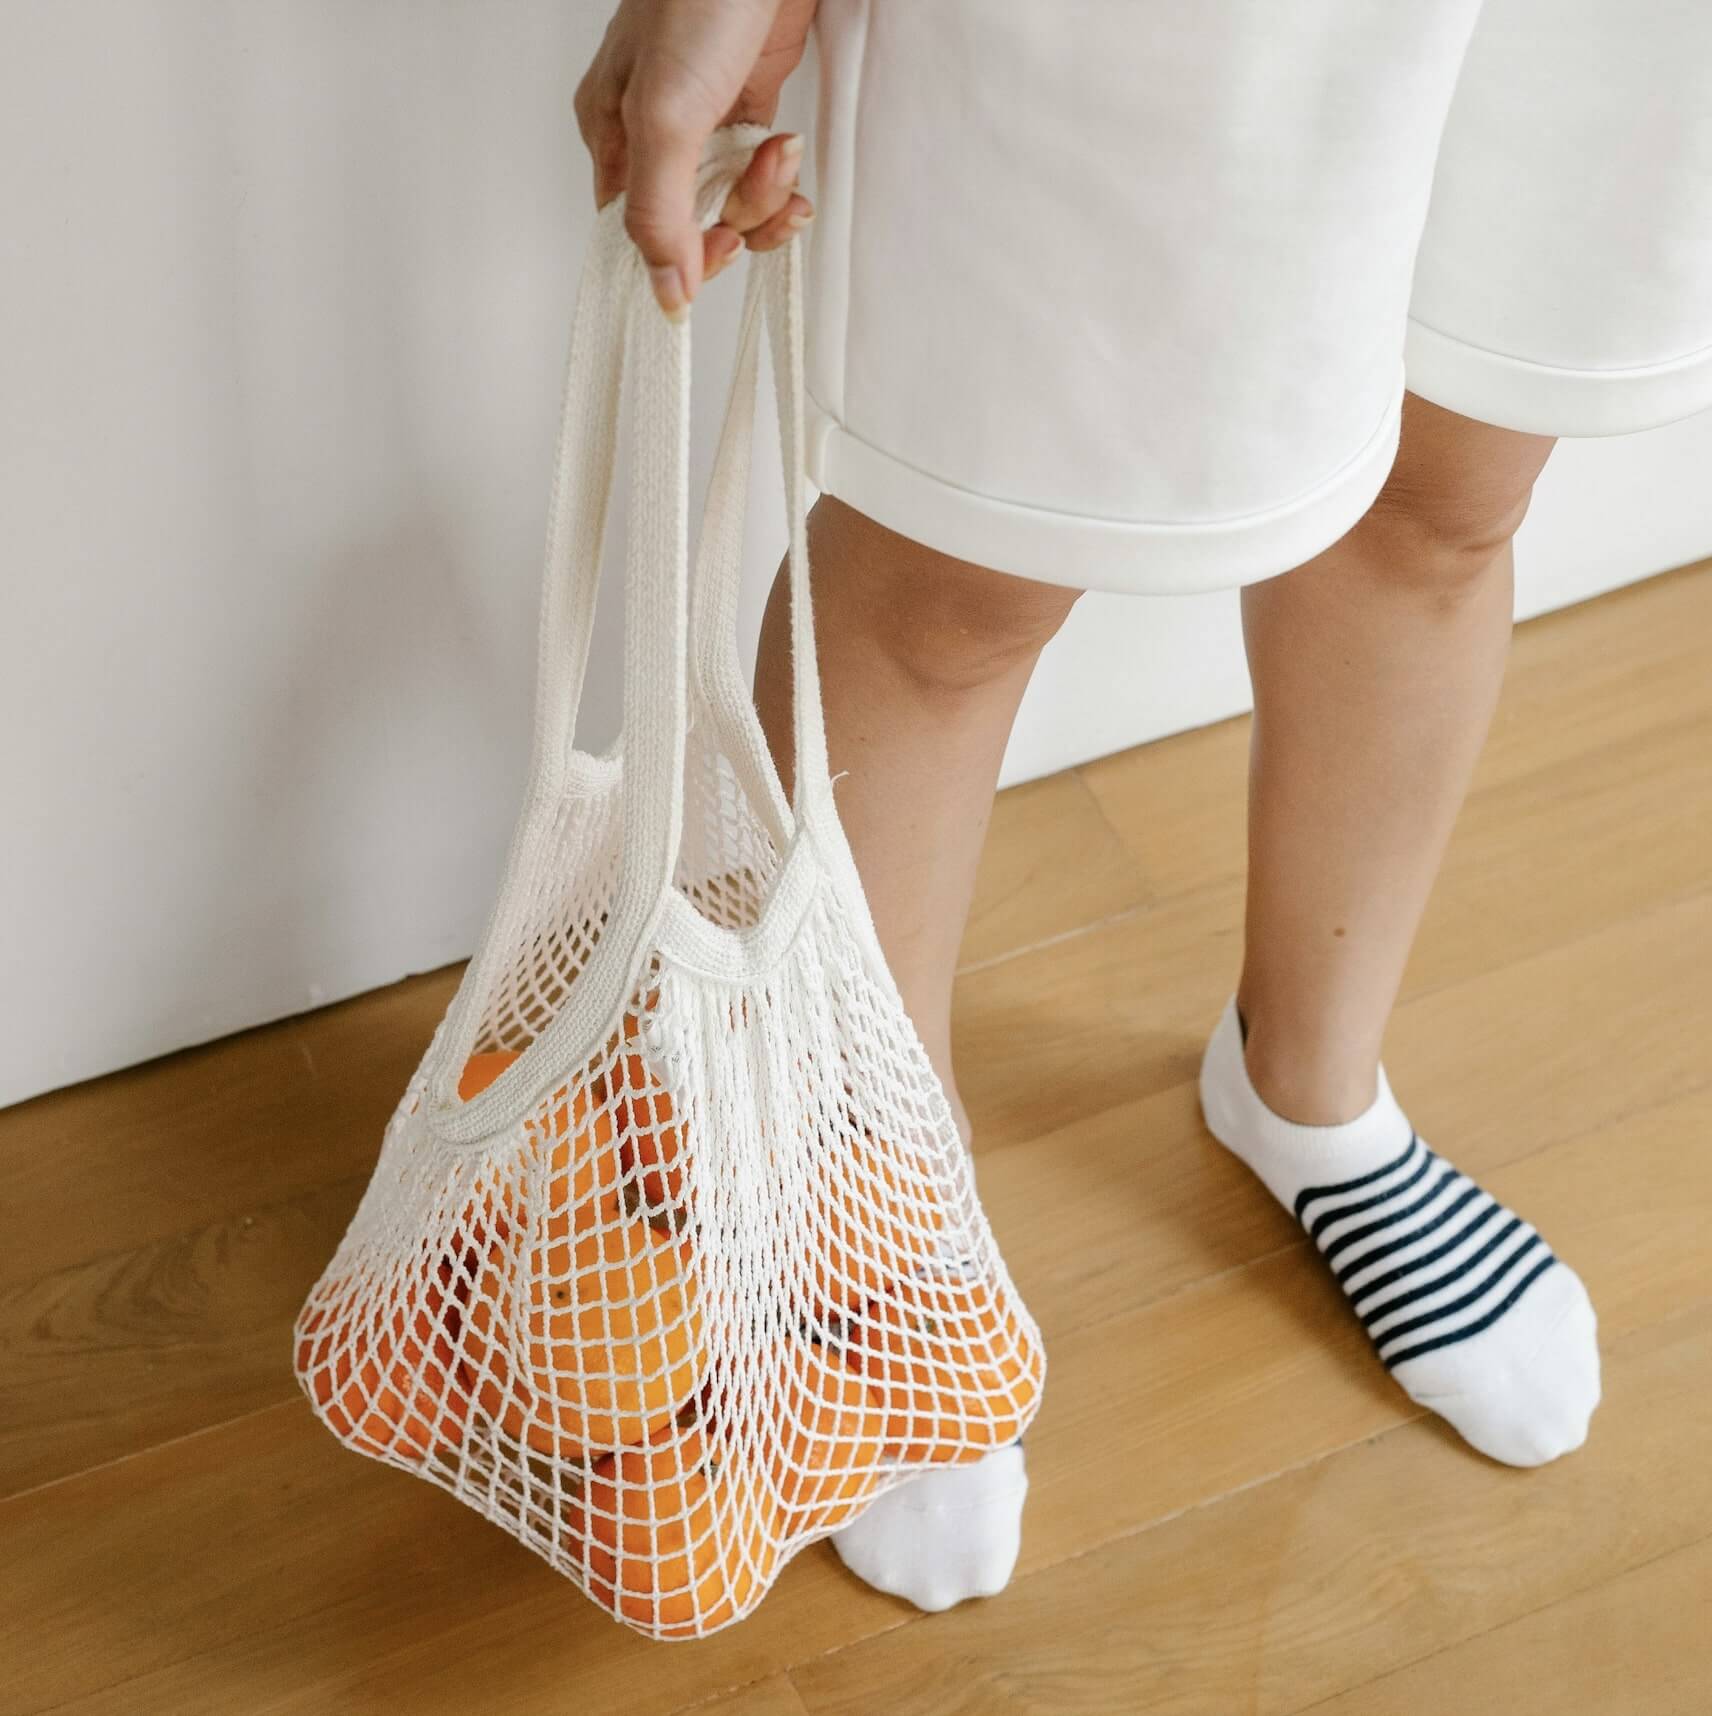 Long Handle String Bag - The Plastic Free Co.